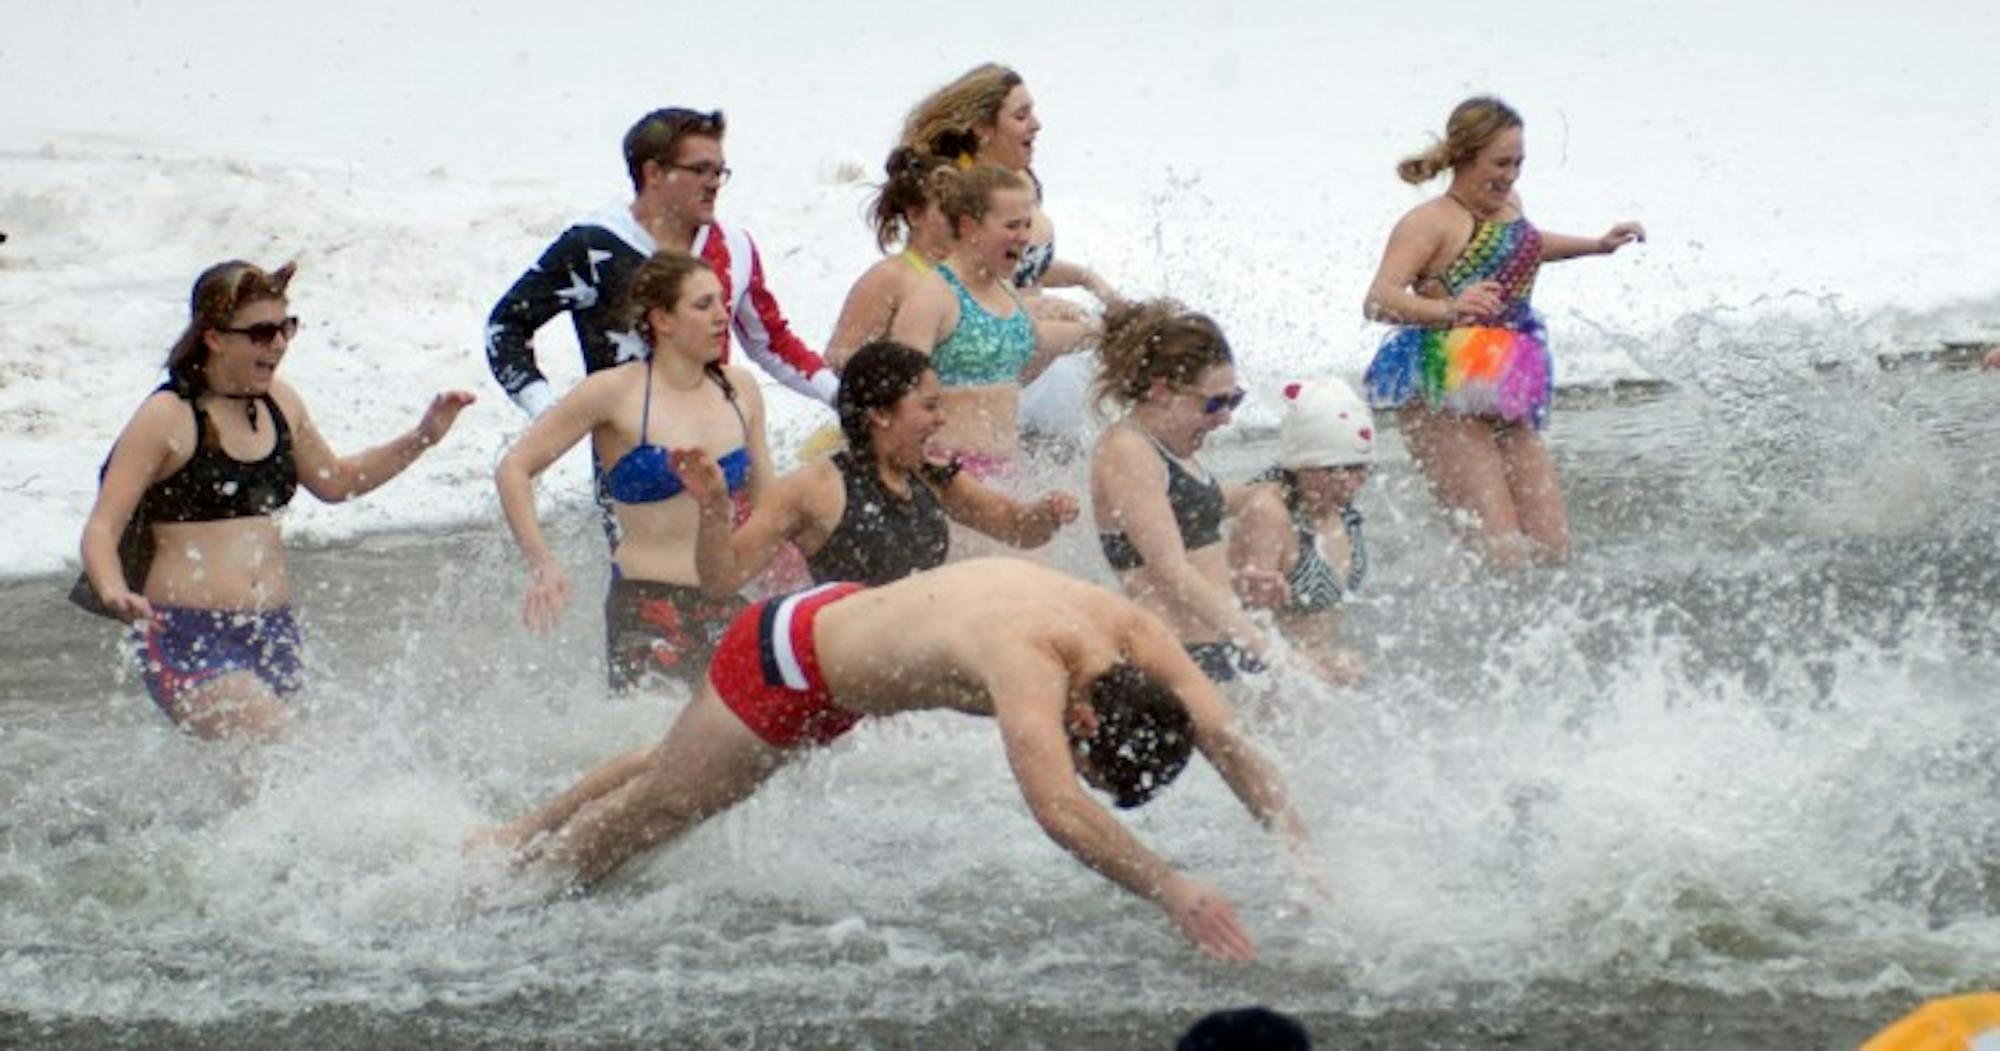 Students plunge into the icy cold water of Saint Joseph’s Lake at last year’s Polar Bear Plunge.